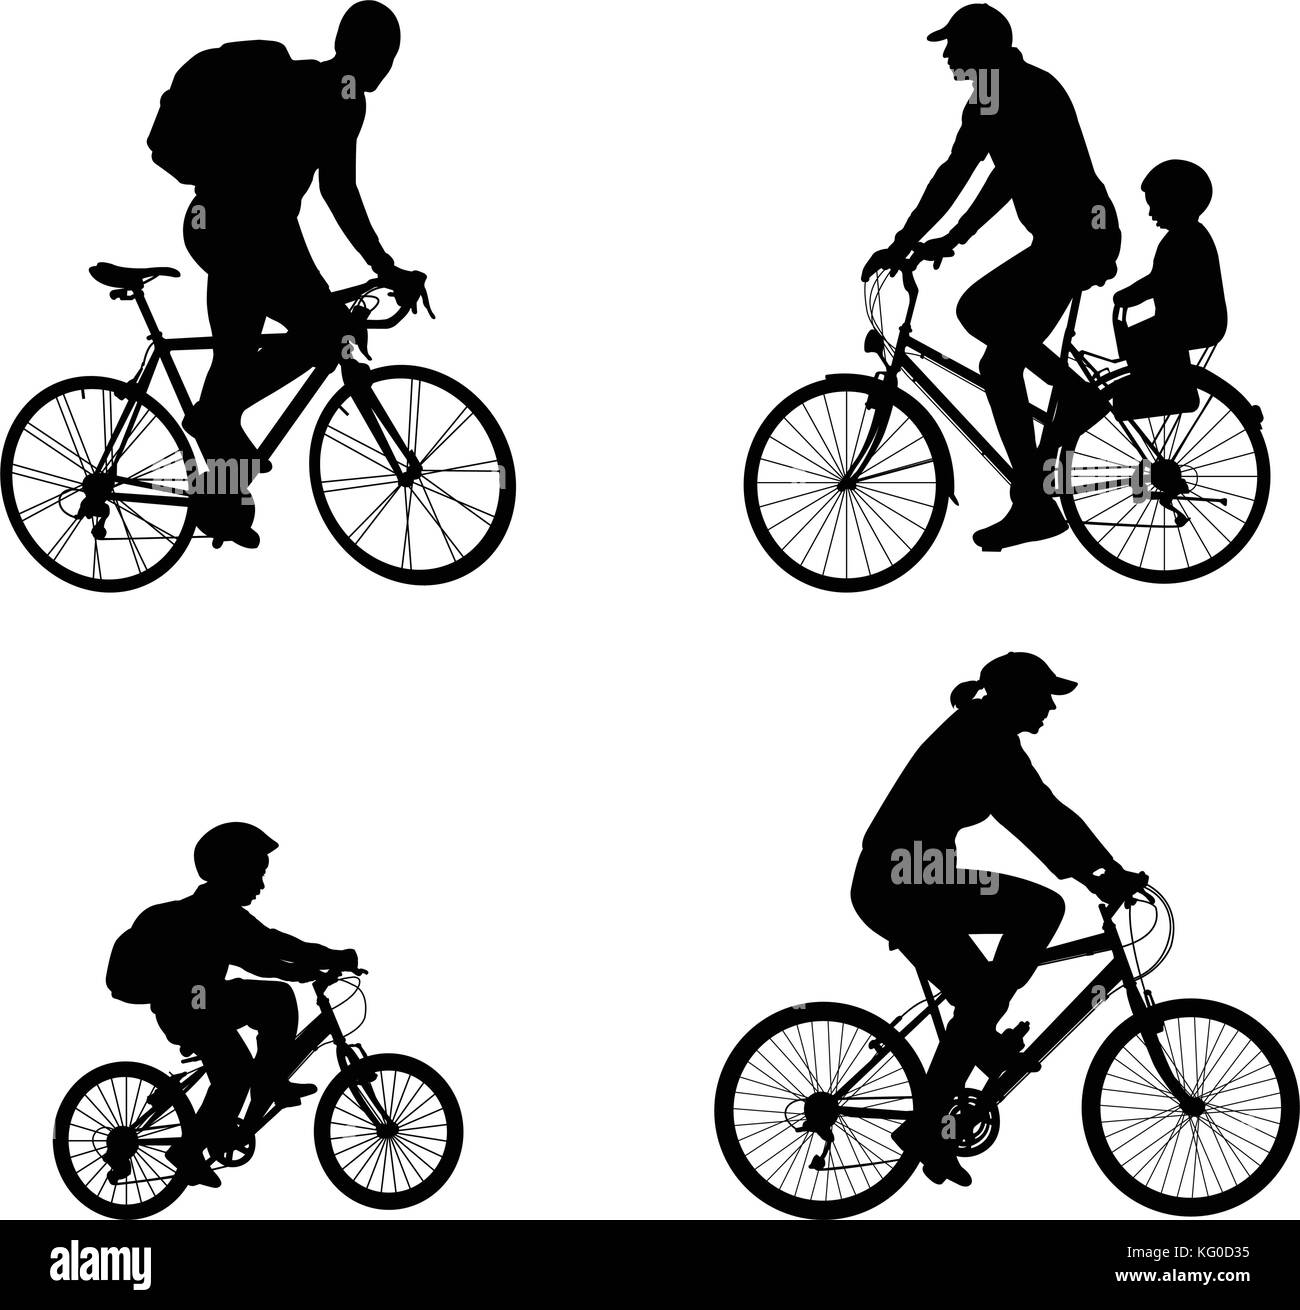 recreational bicyclists silhouettes - vector Stock Vector